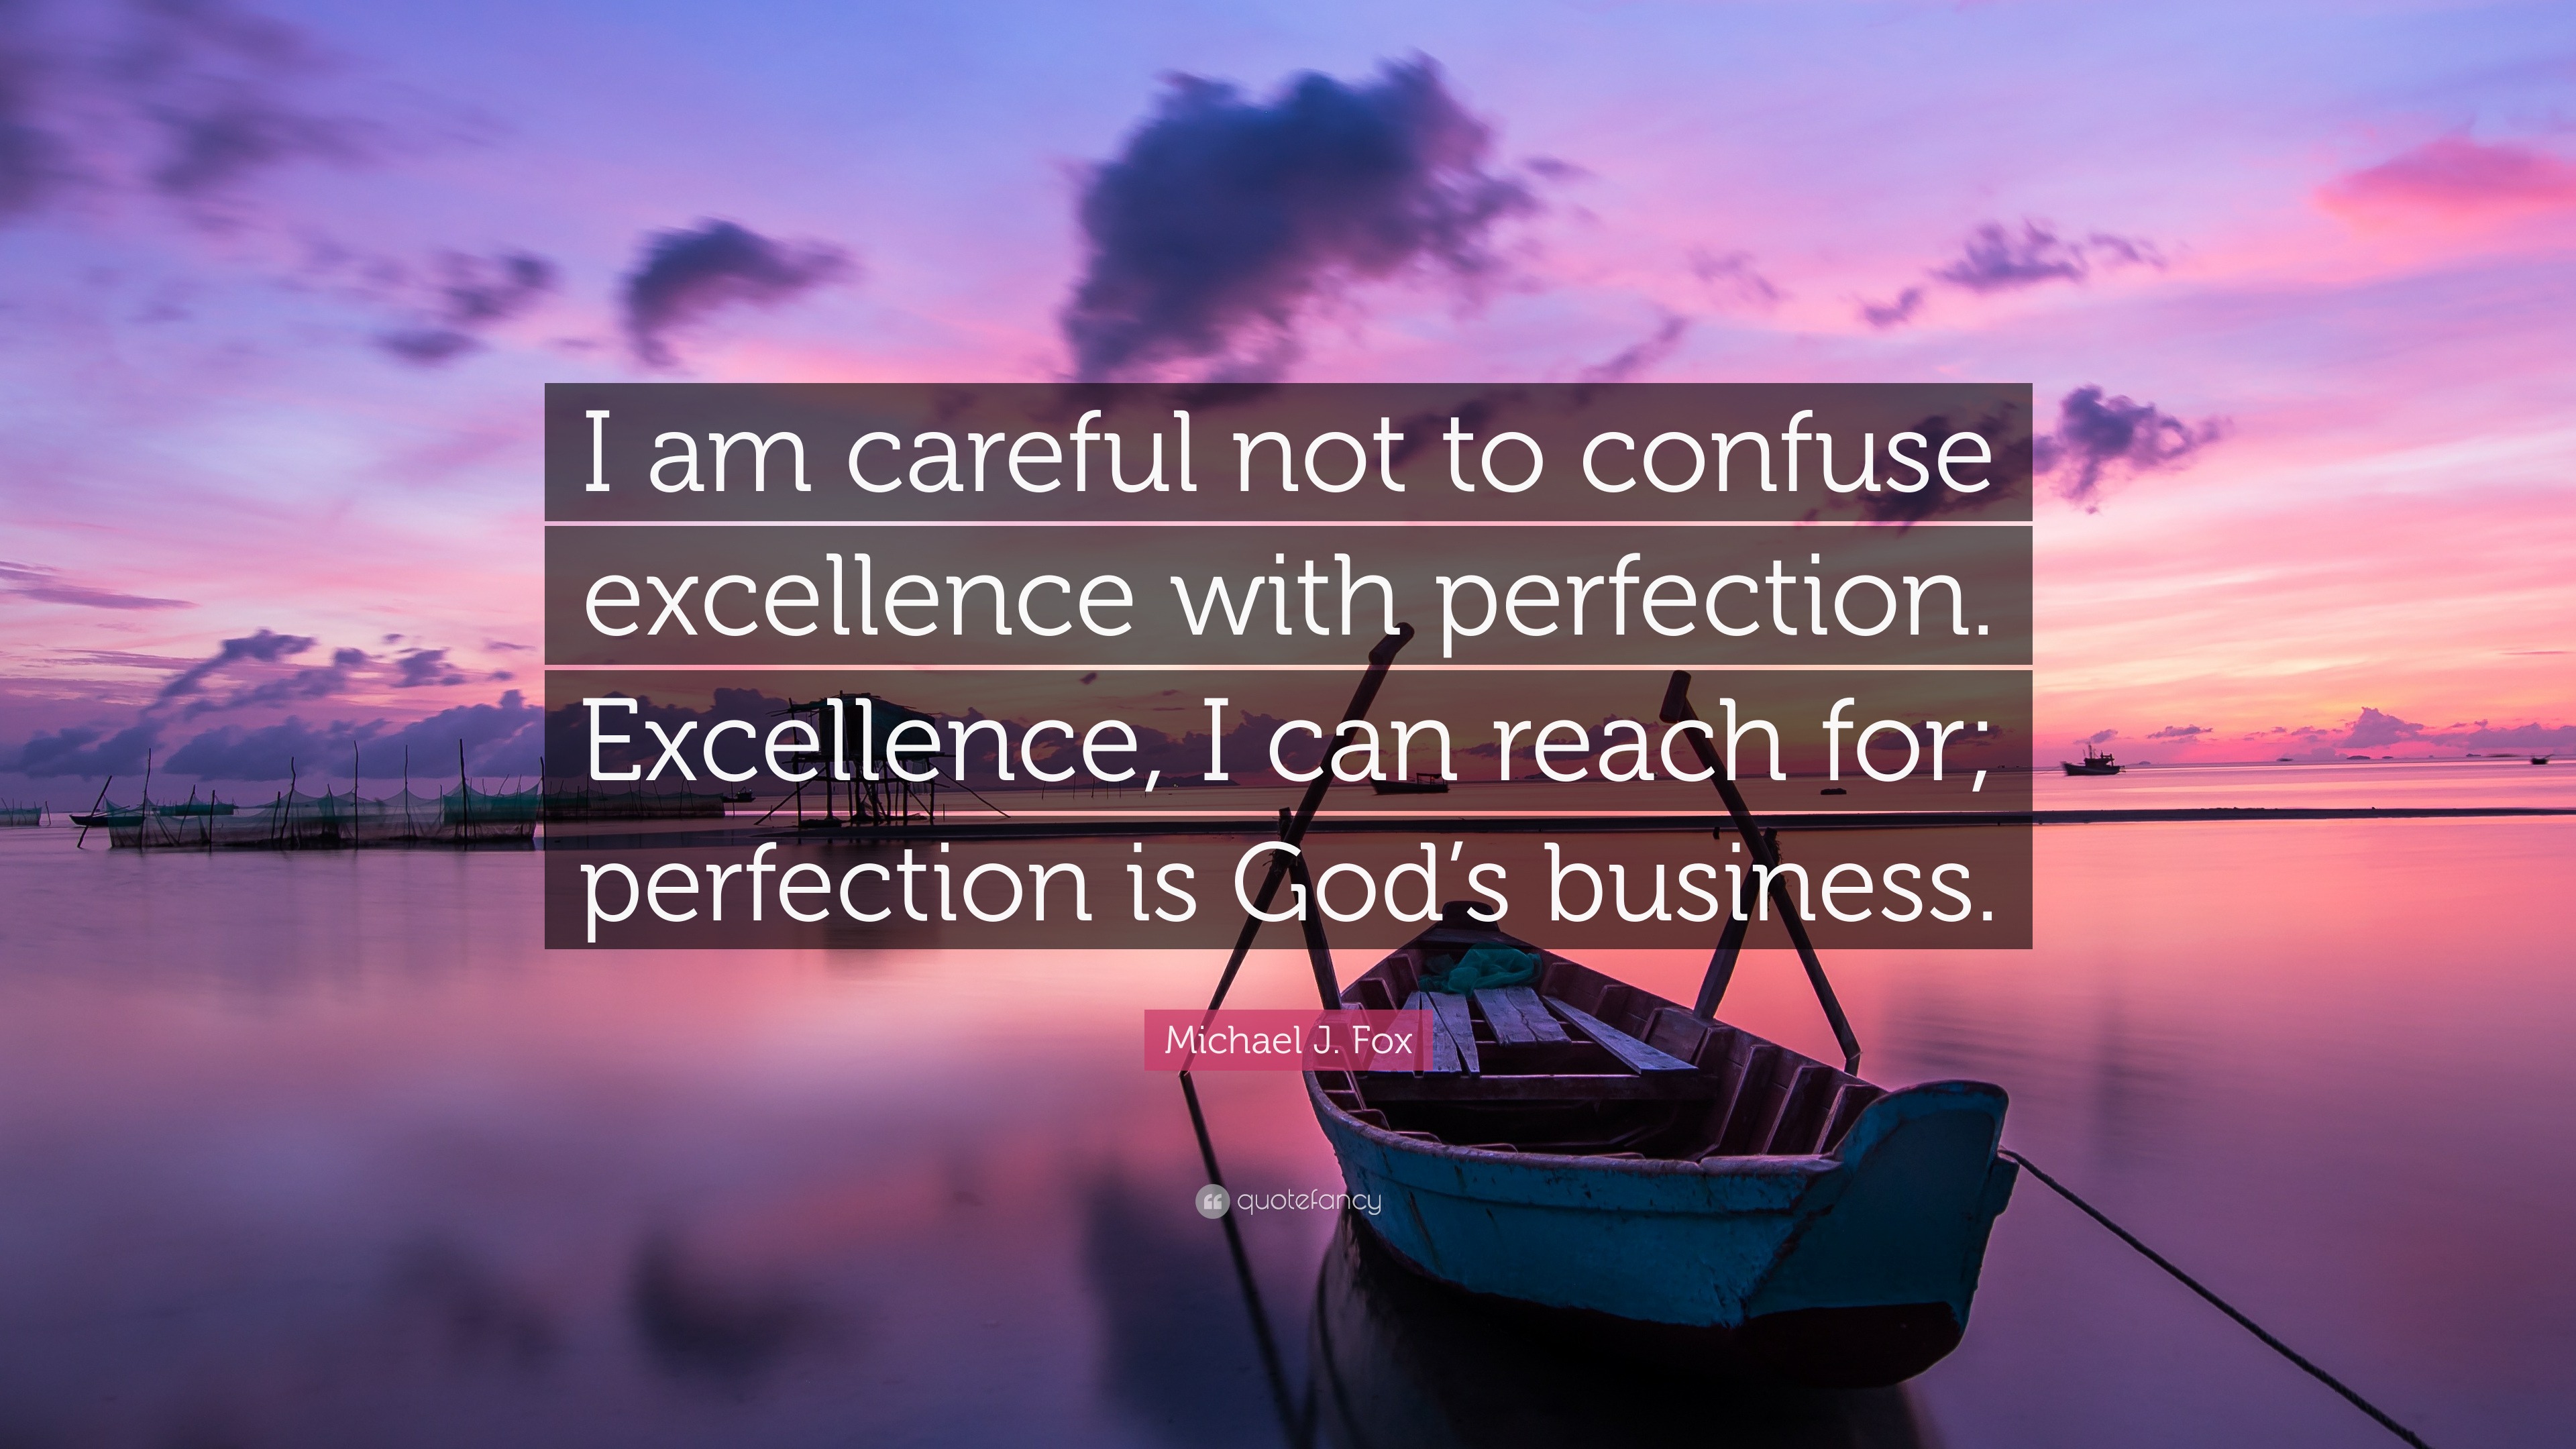 Michael J Fox Quote “i Am Careful Not To Confuse Excellence With Perfection Excellence I Can